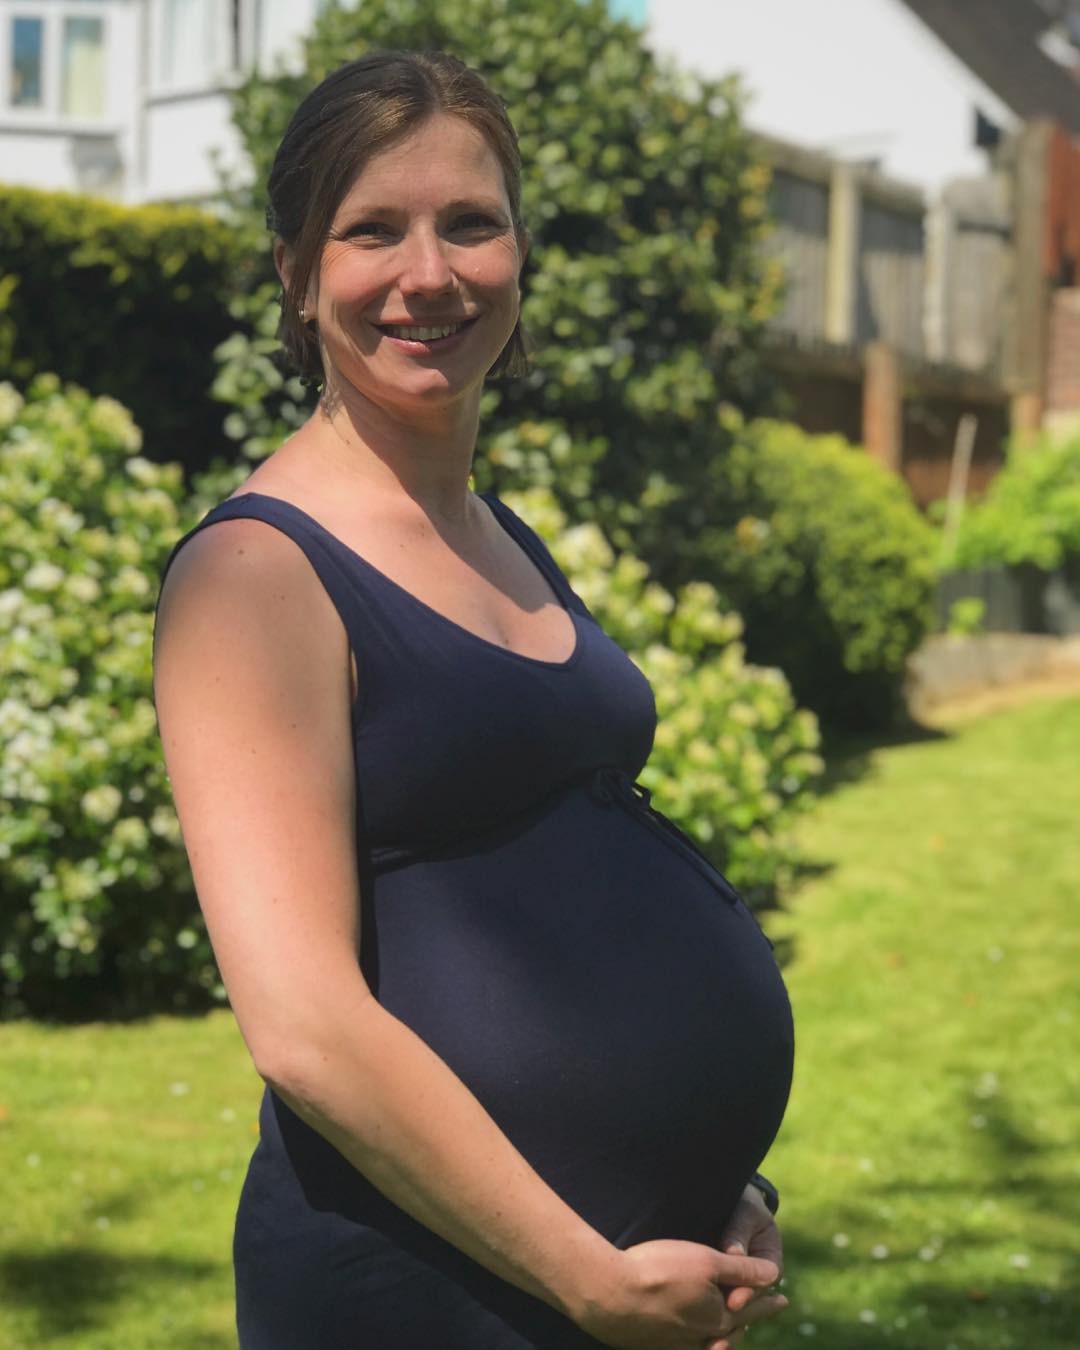 A pregnant woman standing holding her belly in a garden. 